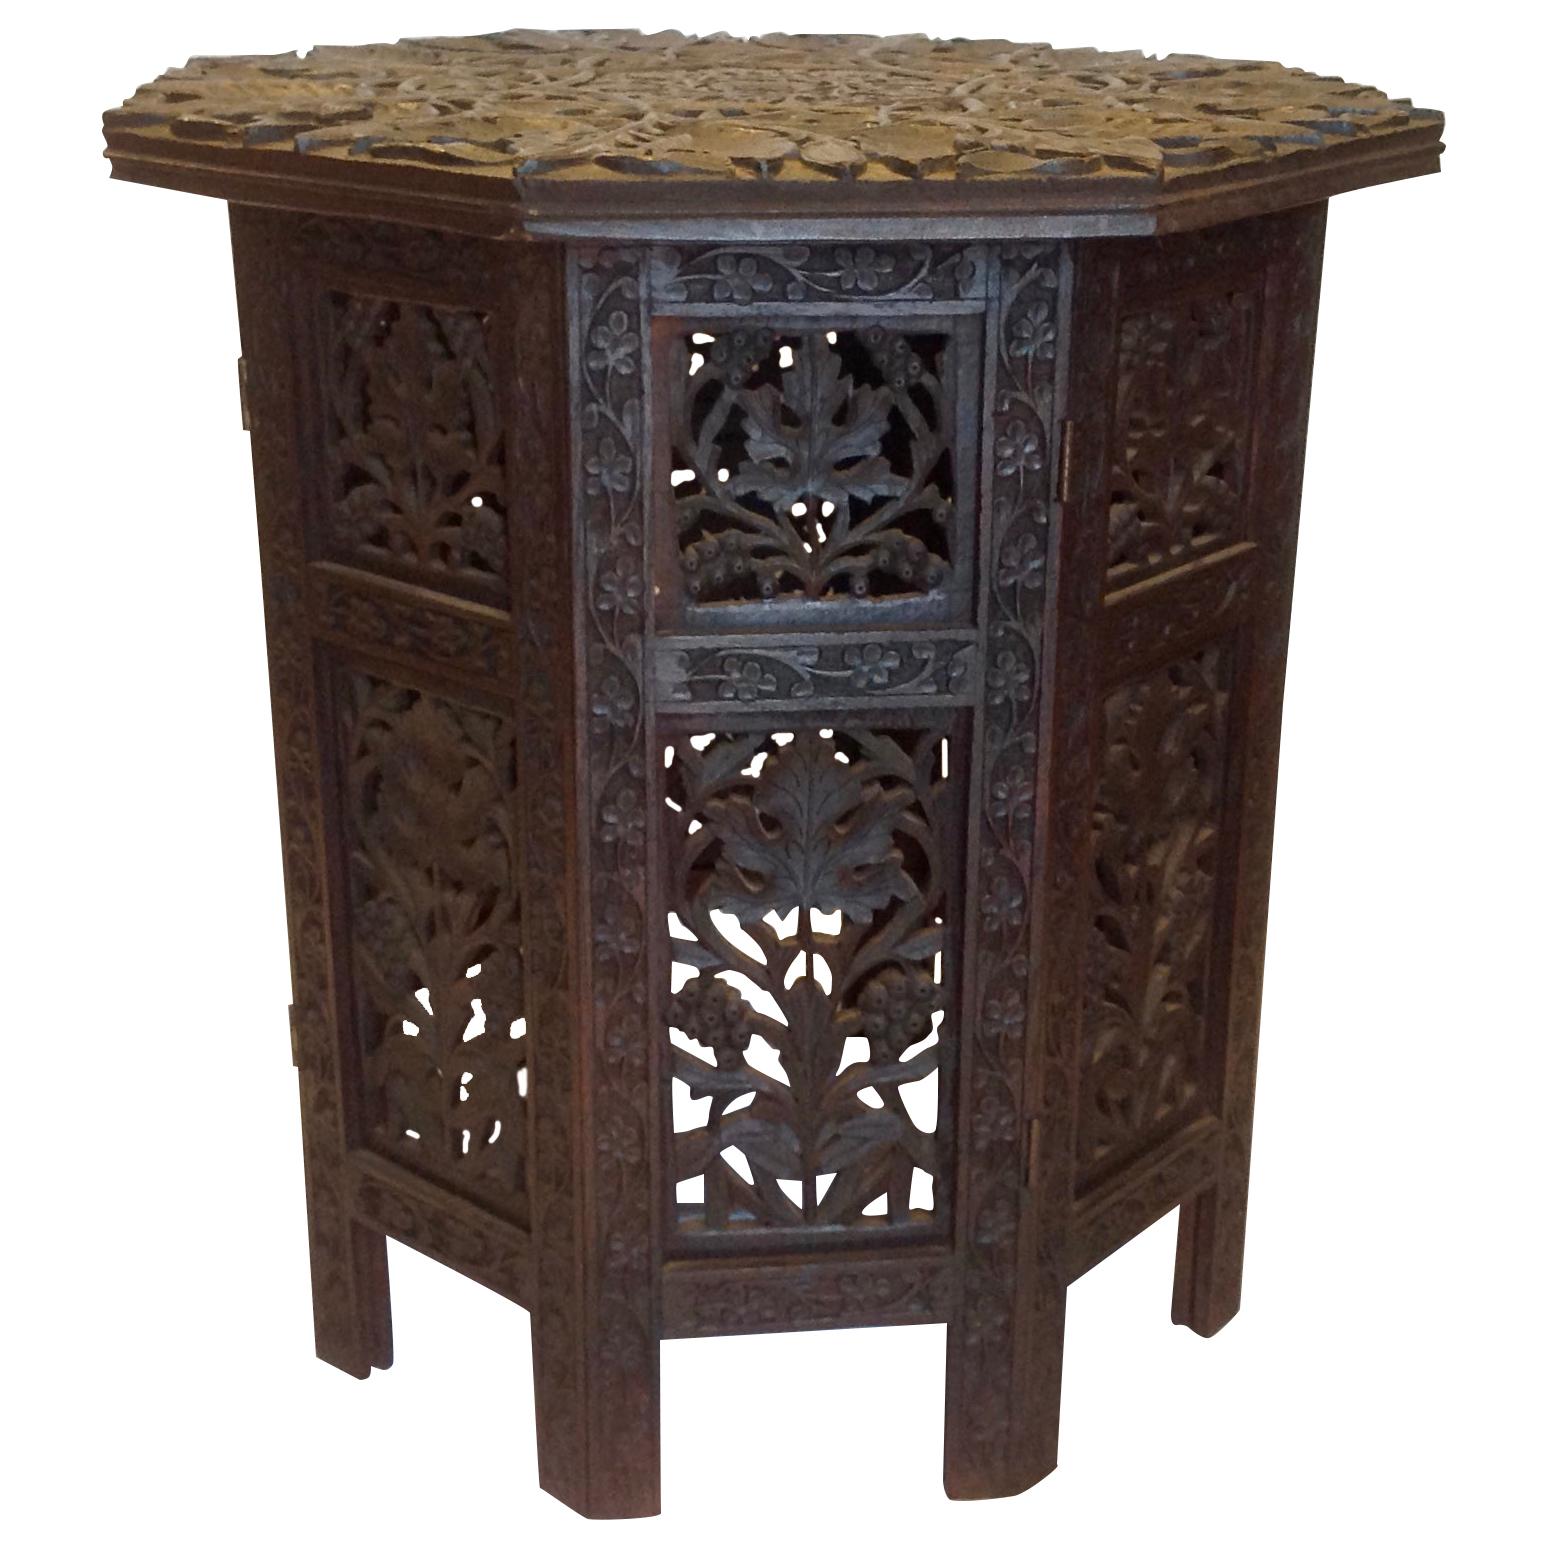 Anglo-Indian Travel Table / Tabouret